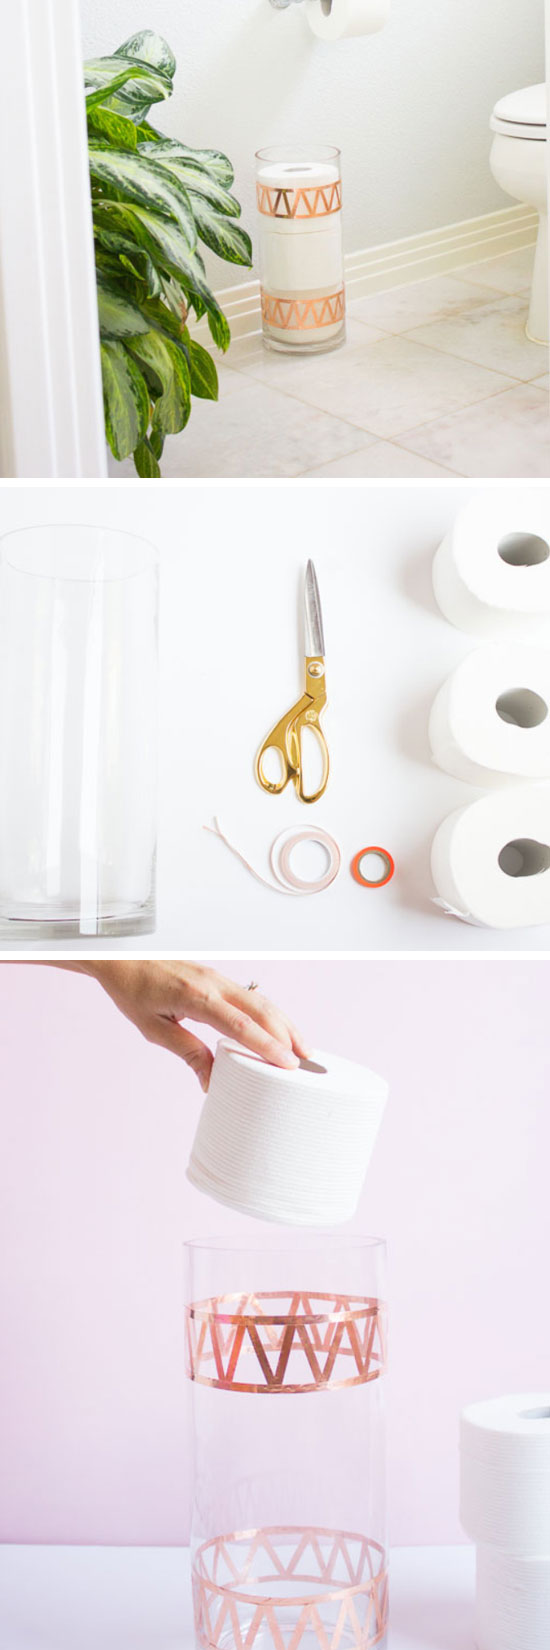 25 Awesome DIY Projects for Your Bathroom